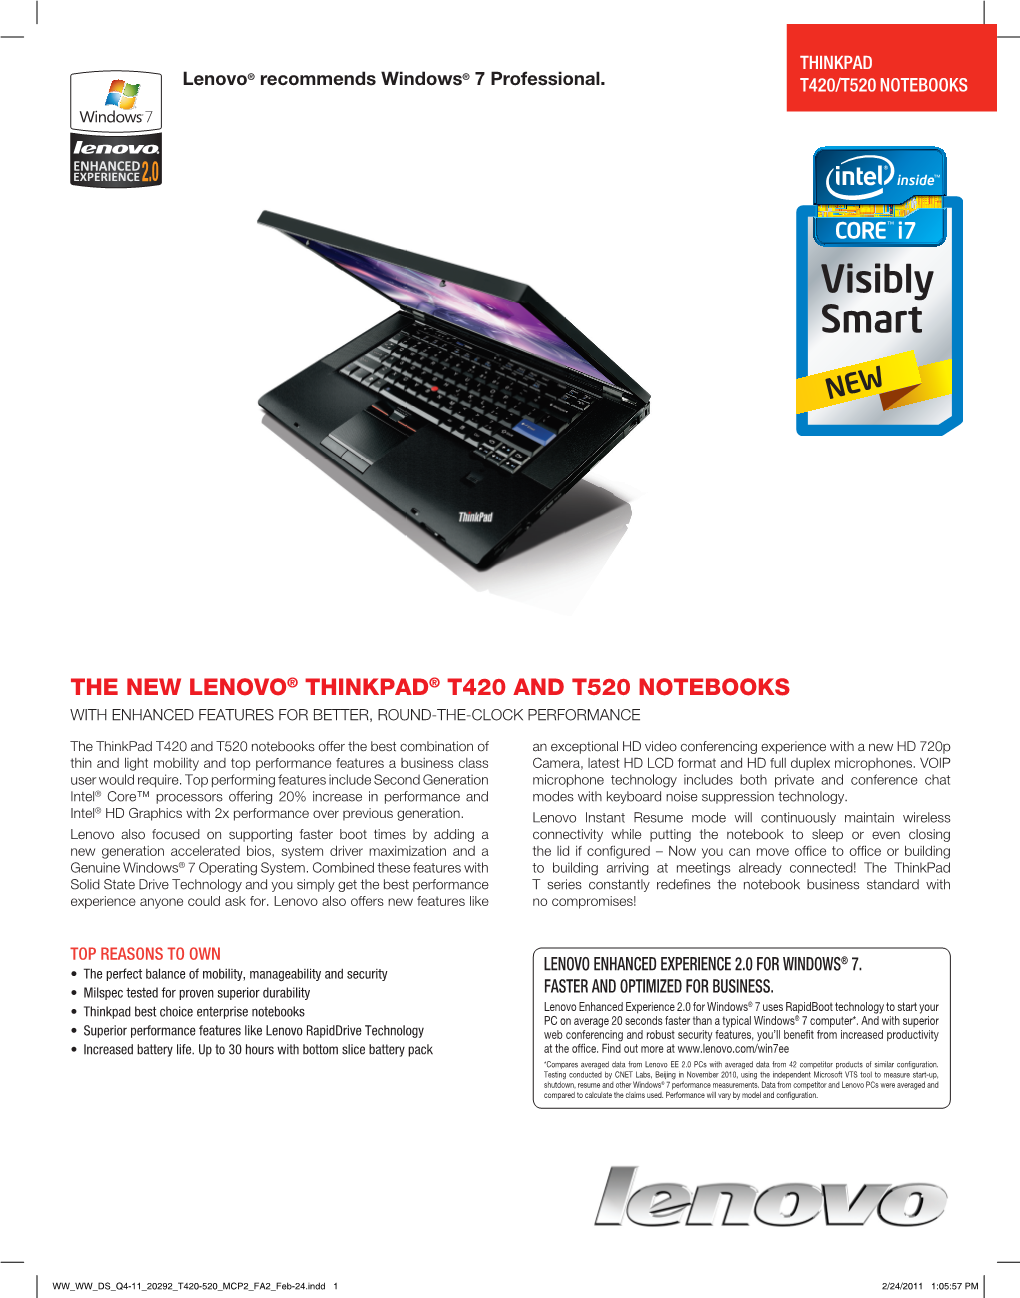 The New Lenovo® Thinkpad® T420 and T520 Notebooks with Enhanced Features for Better, Round-The-Clock Performance